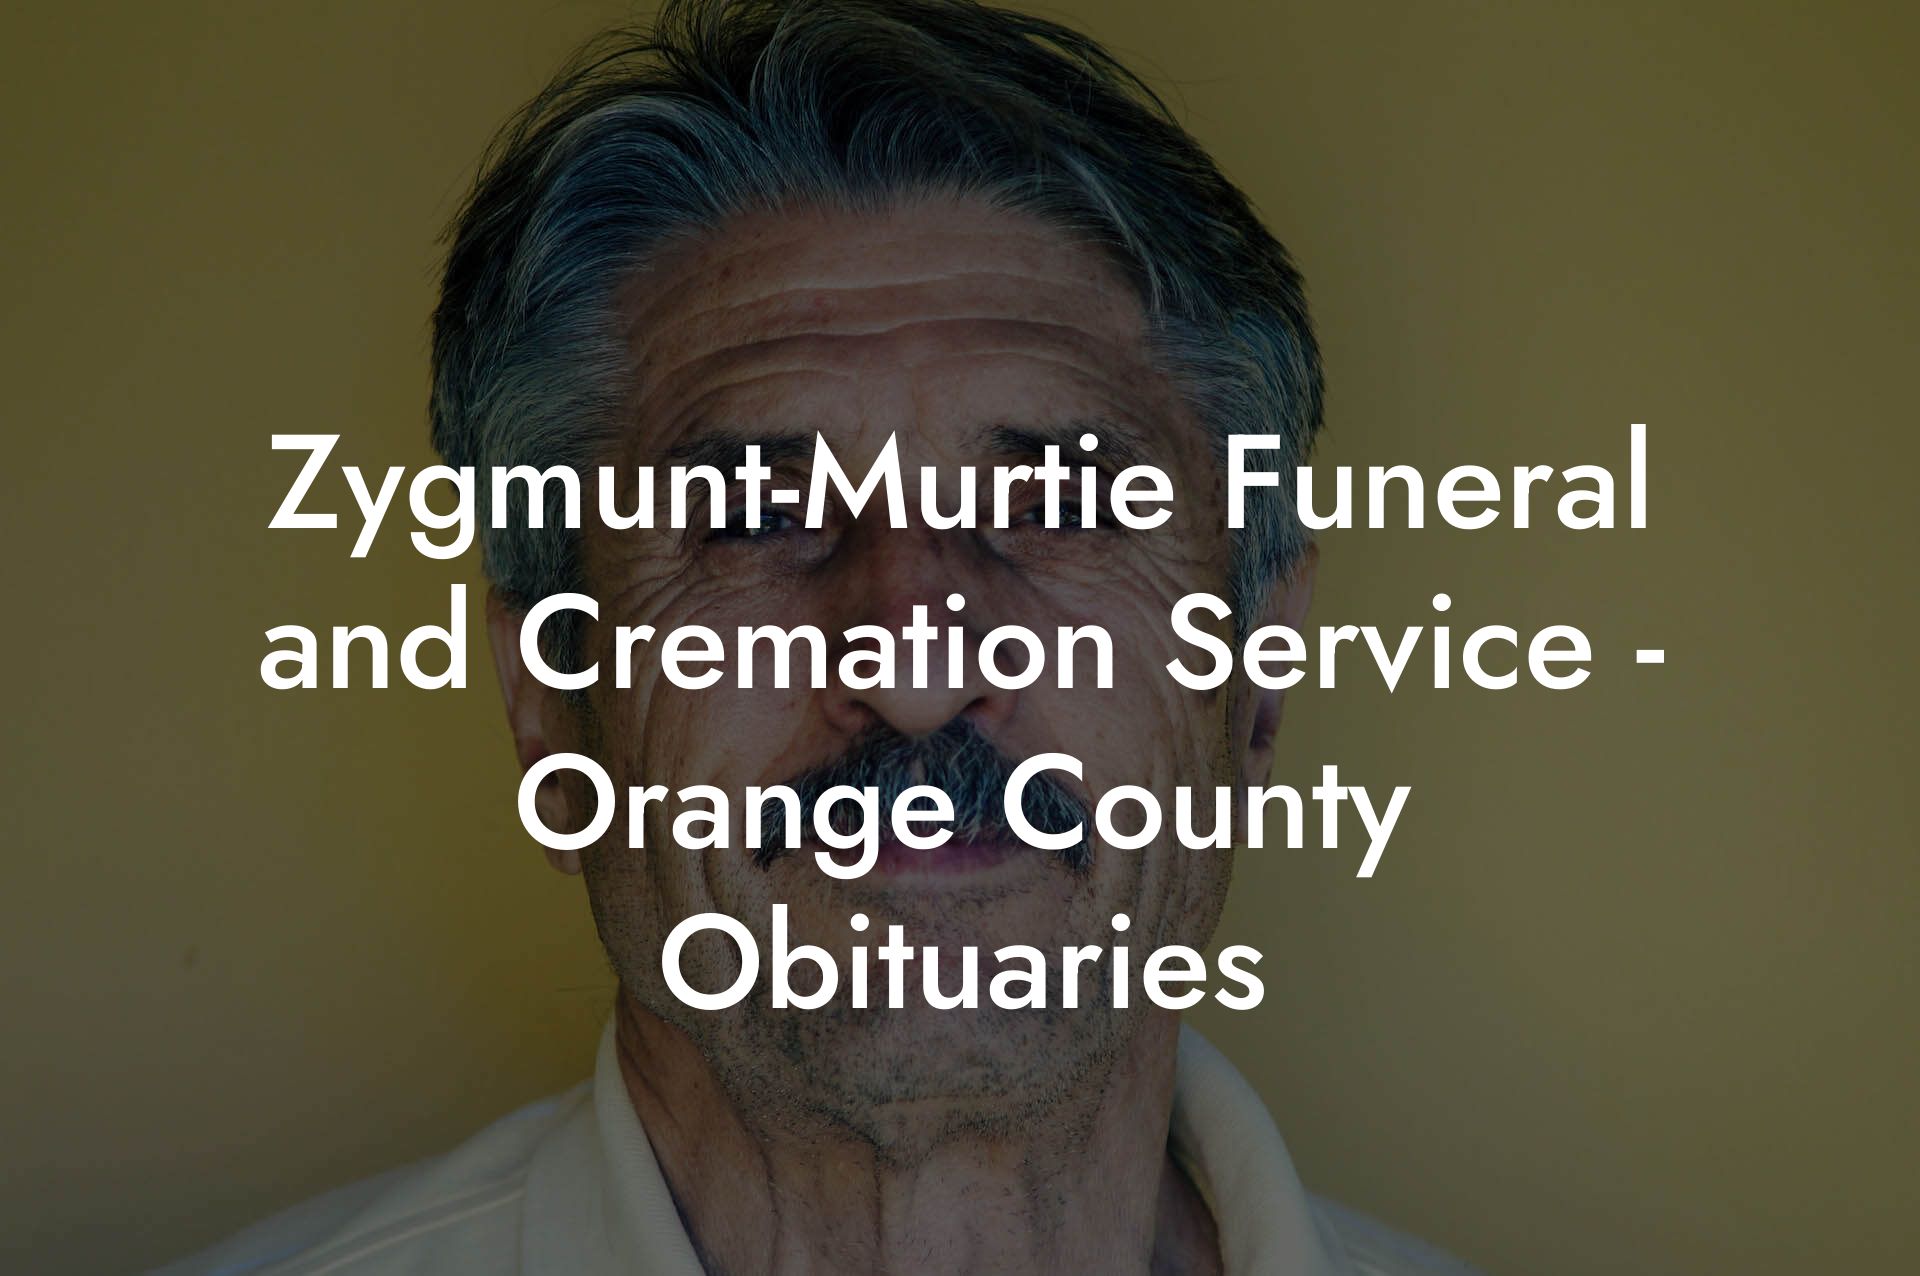 Zygmunt-Murtie Funeral and Cremation Service - Orange County Obituaries